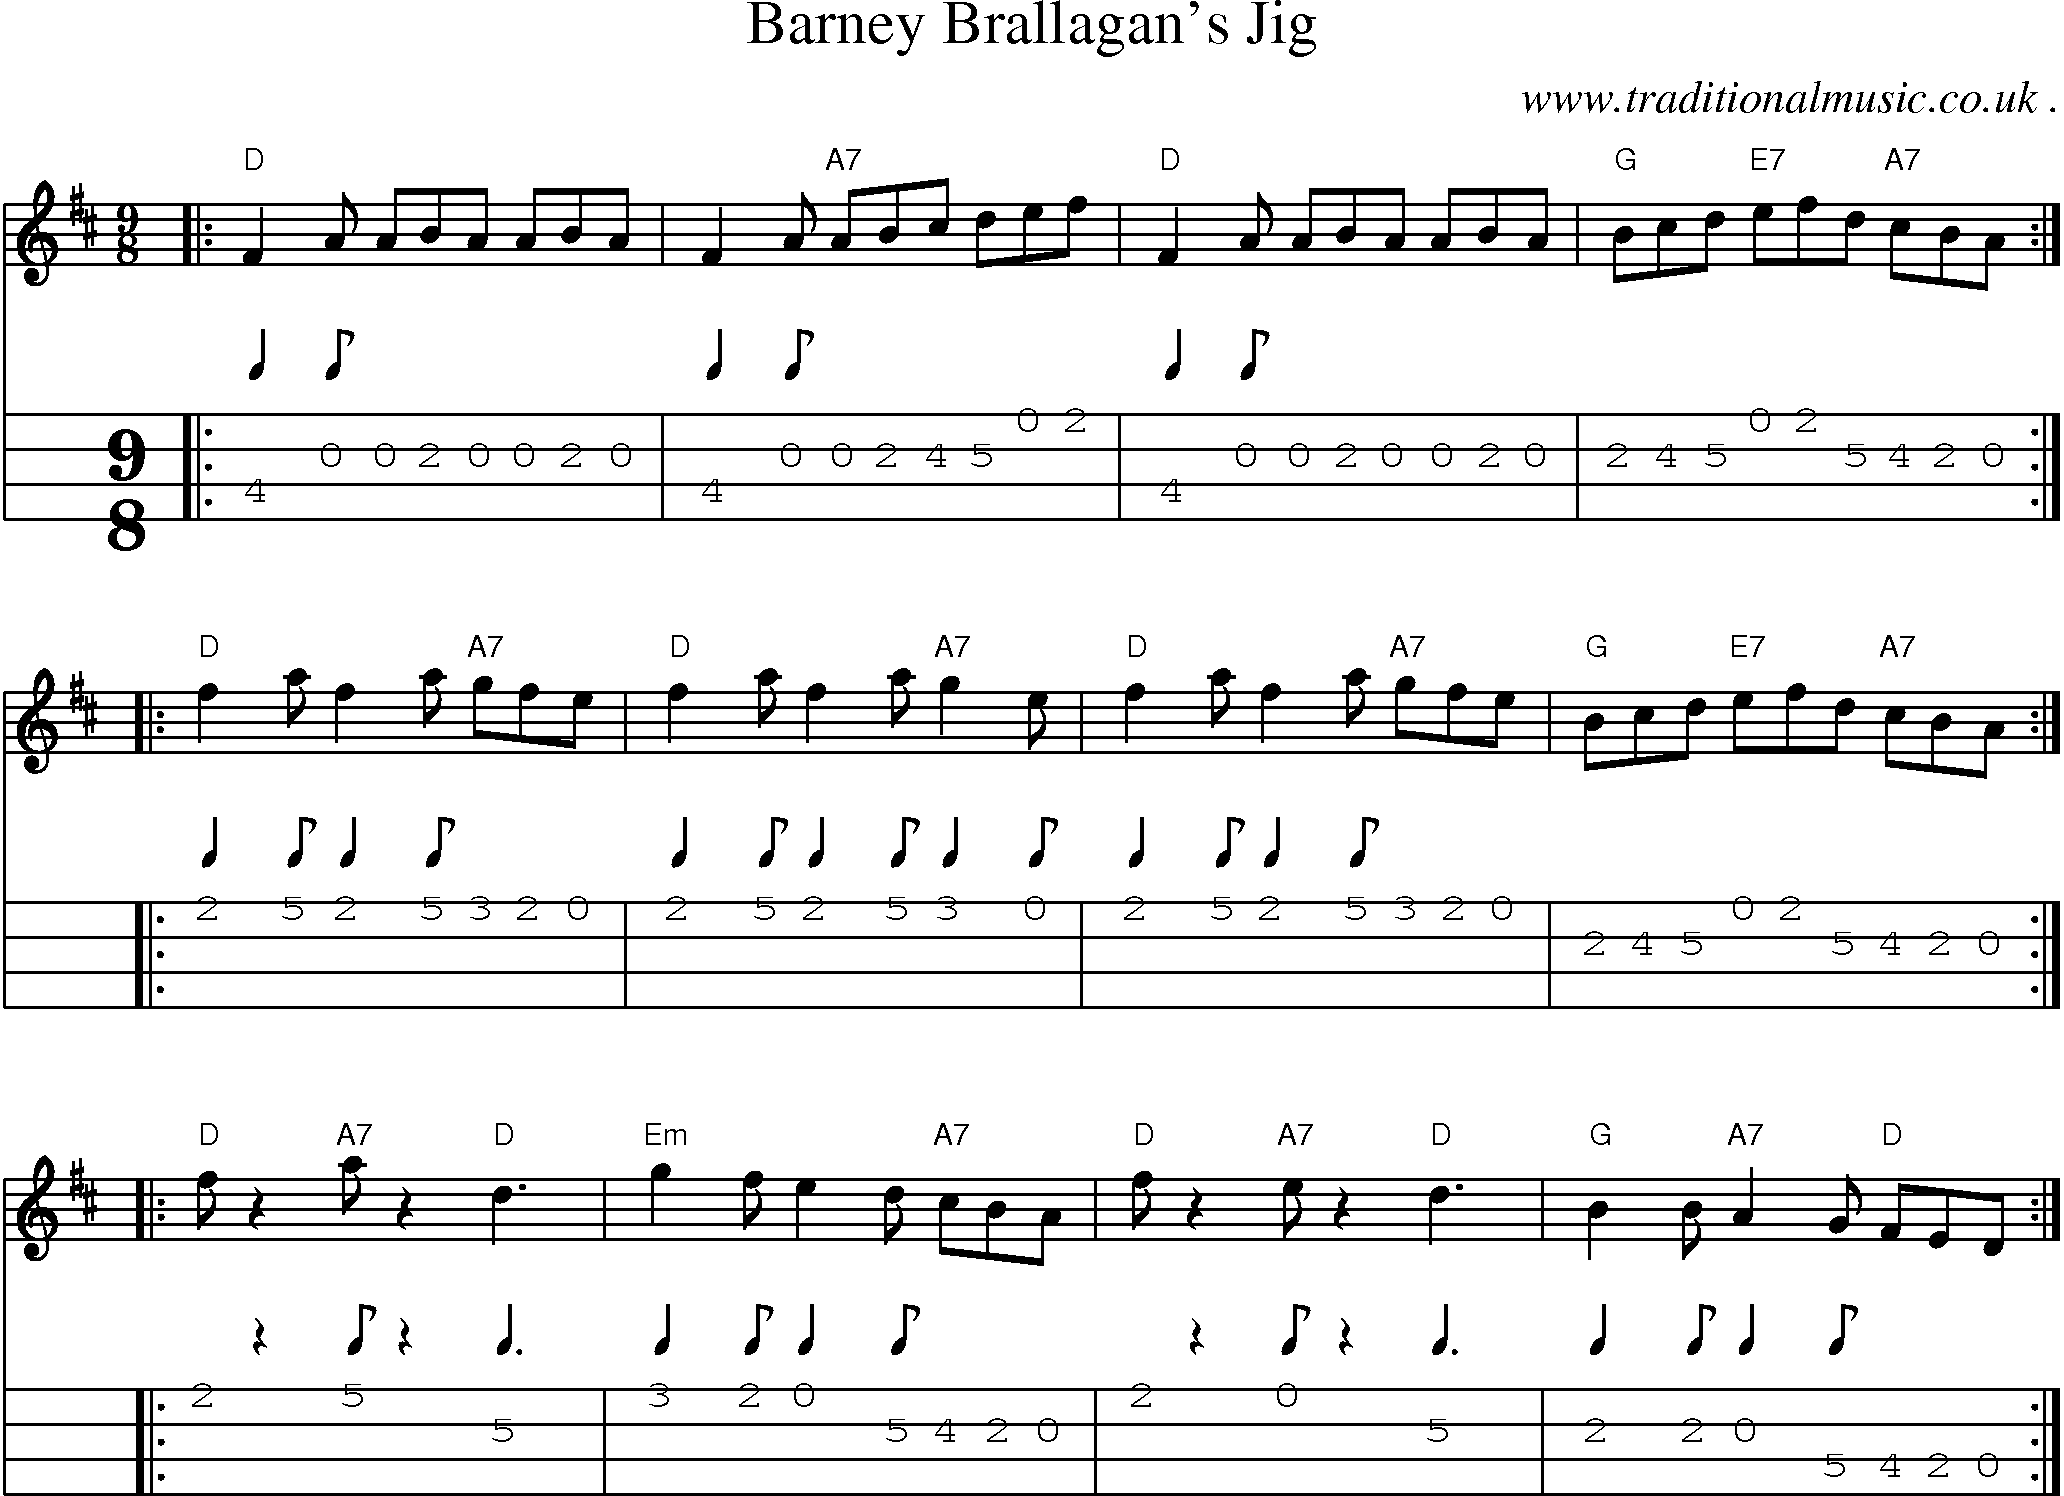 Sheet-music  score, Chords and Mandolin Tabs for Barney Brallagans Jig